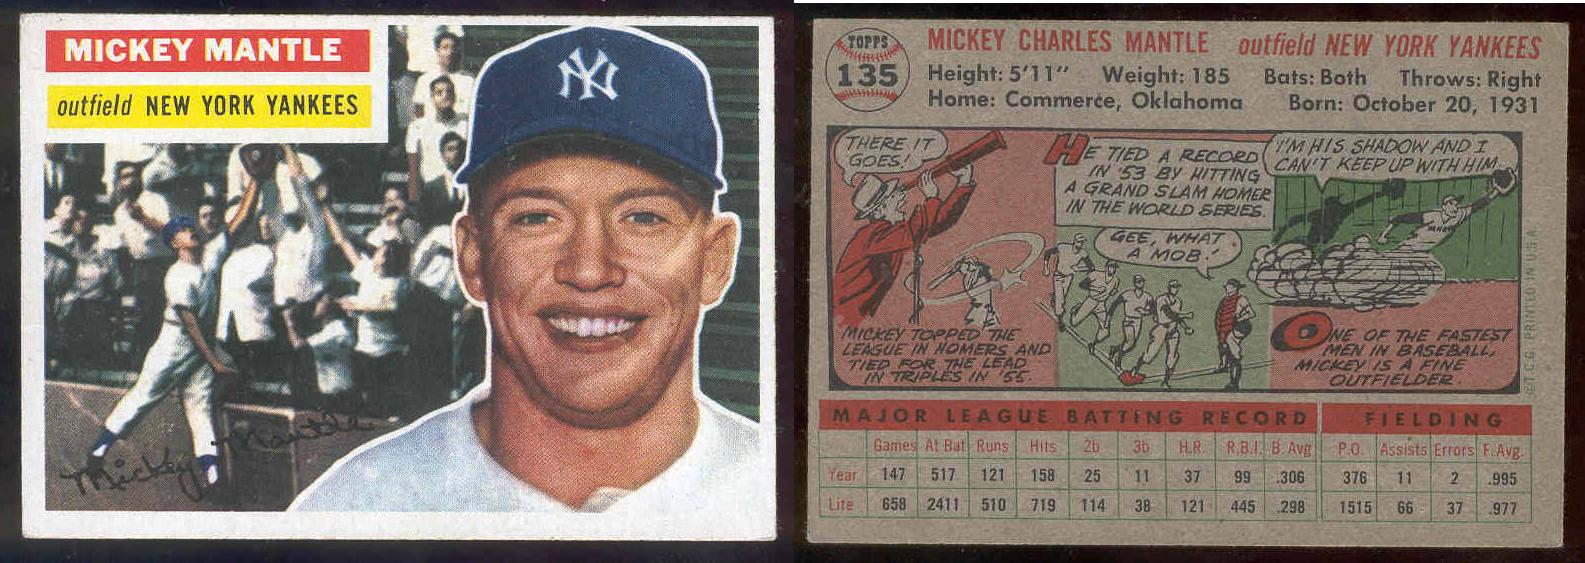 Mickey Mantle 1956